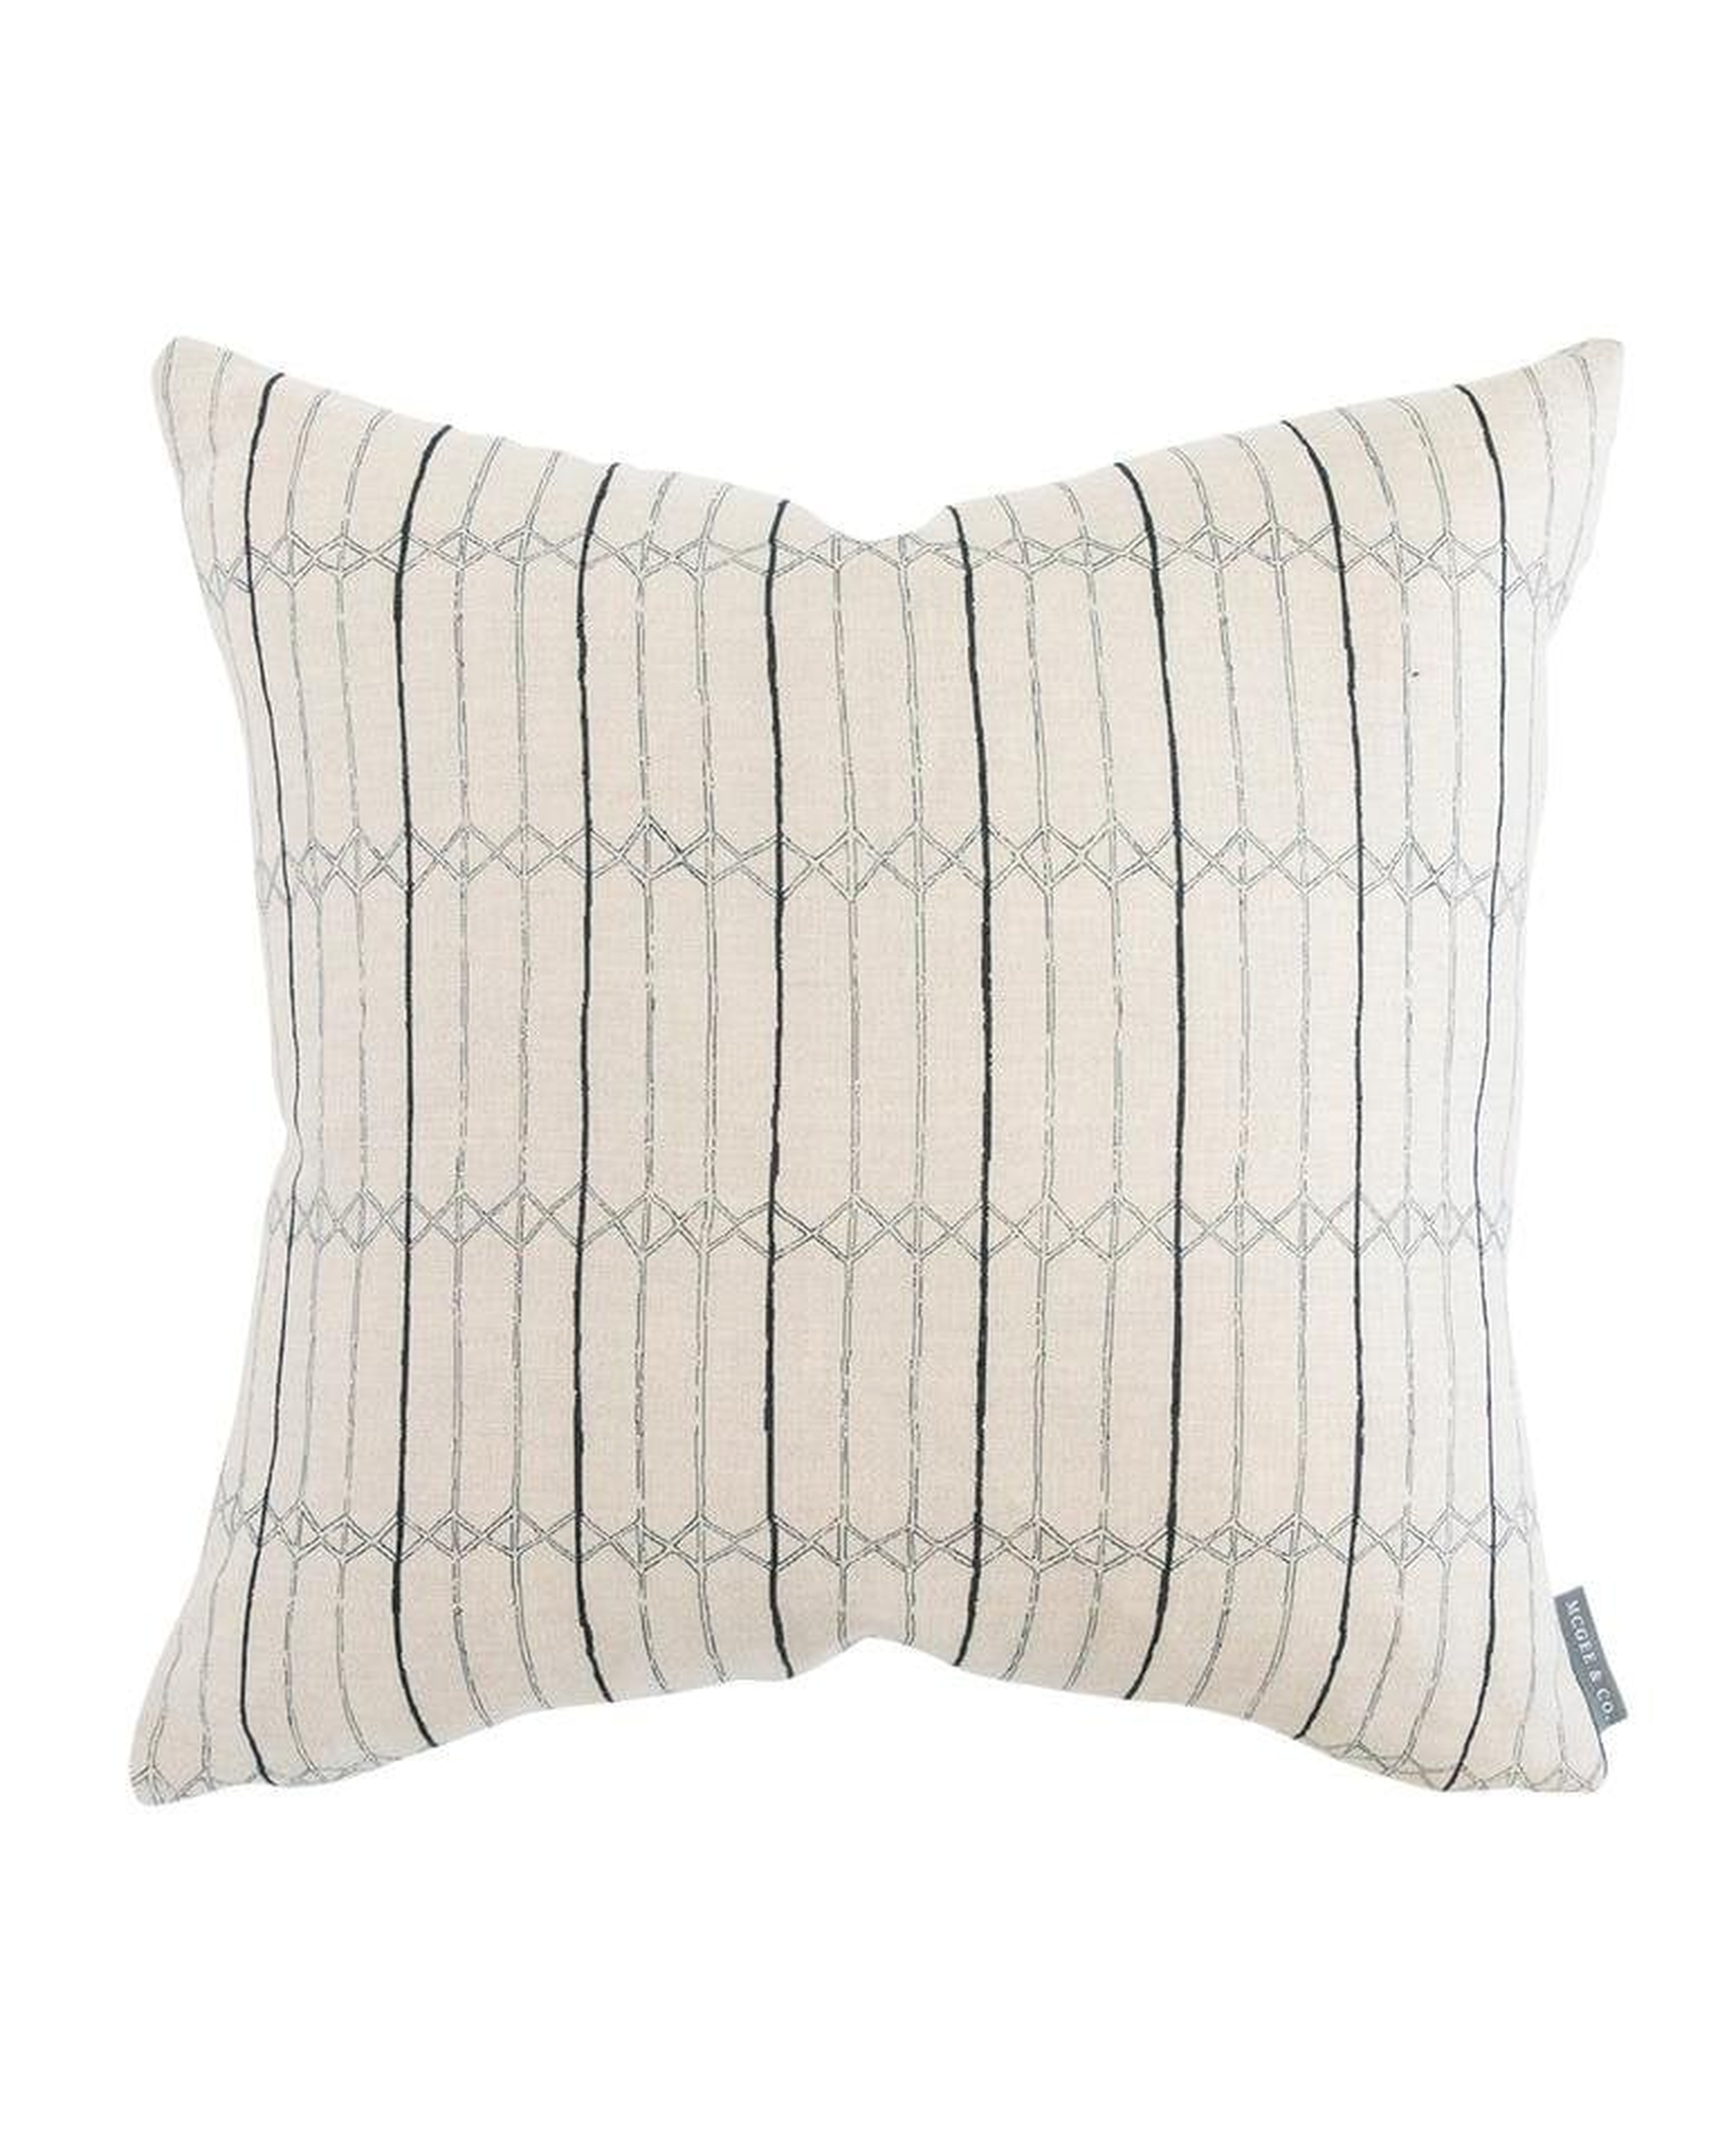 MINERVA PILLOW COVER - 20" x 20" - McGee & Co.